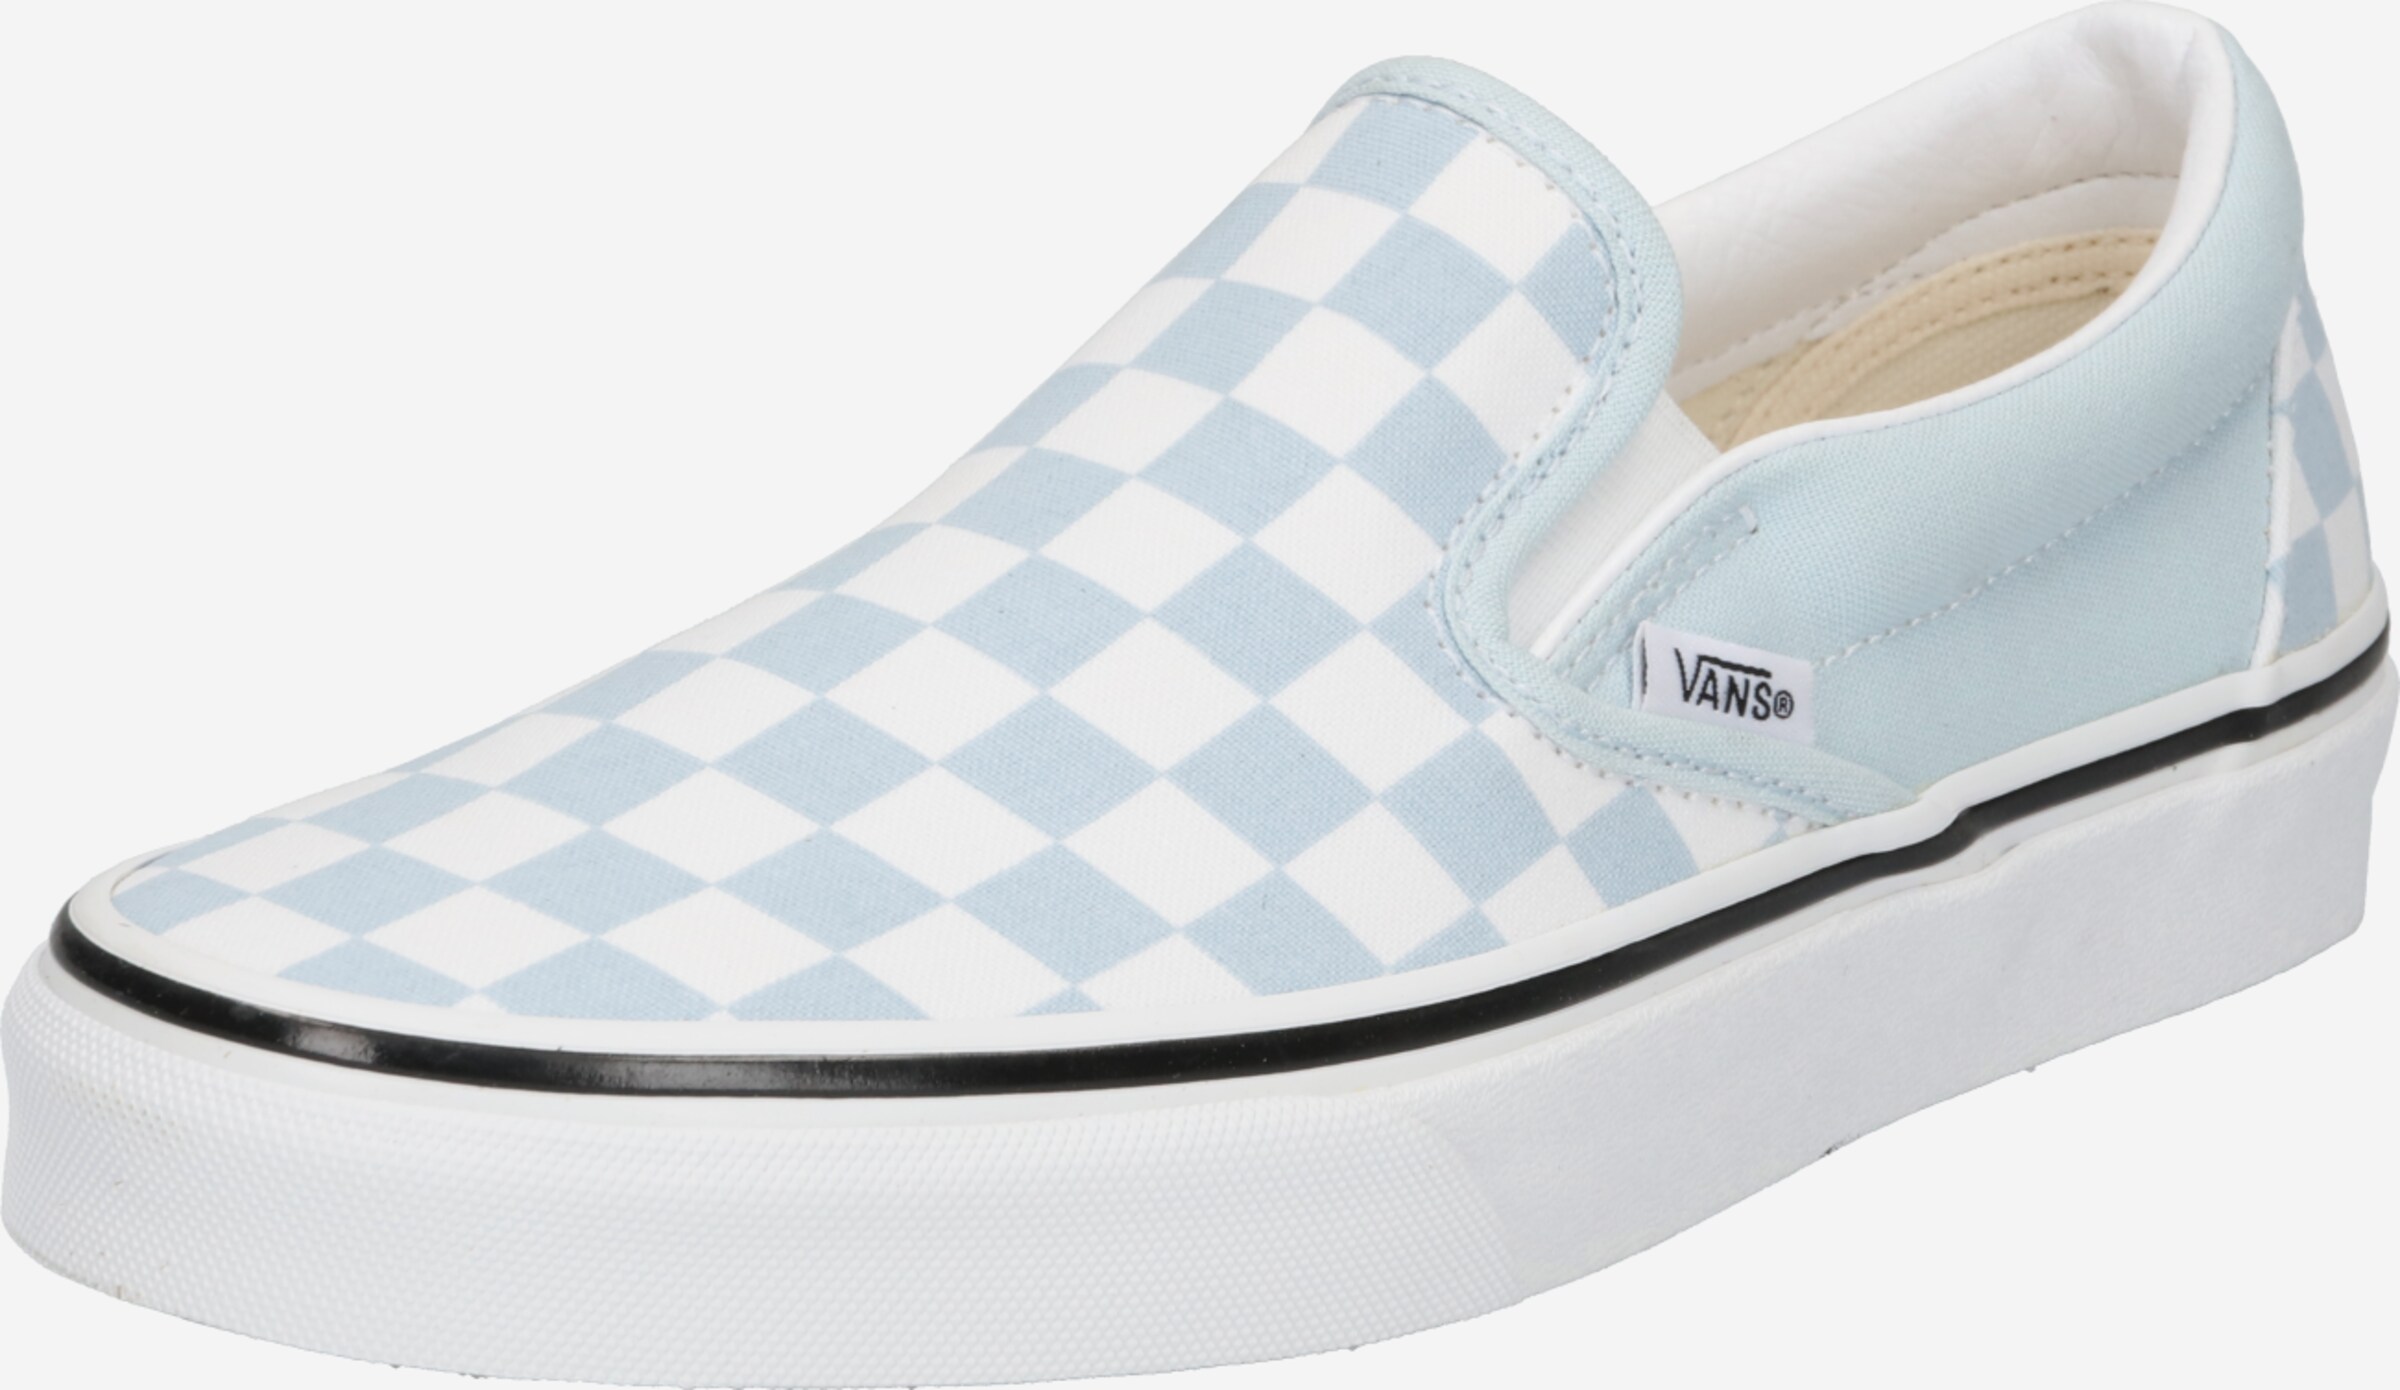 Zapatos VANS para mujer online en ABOUT YOU